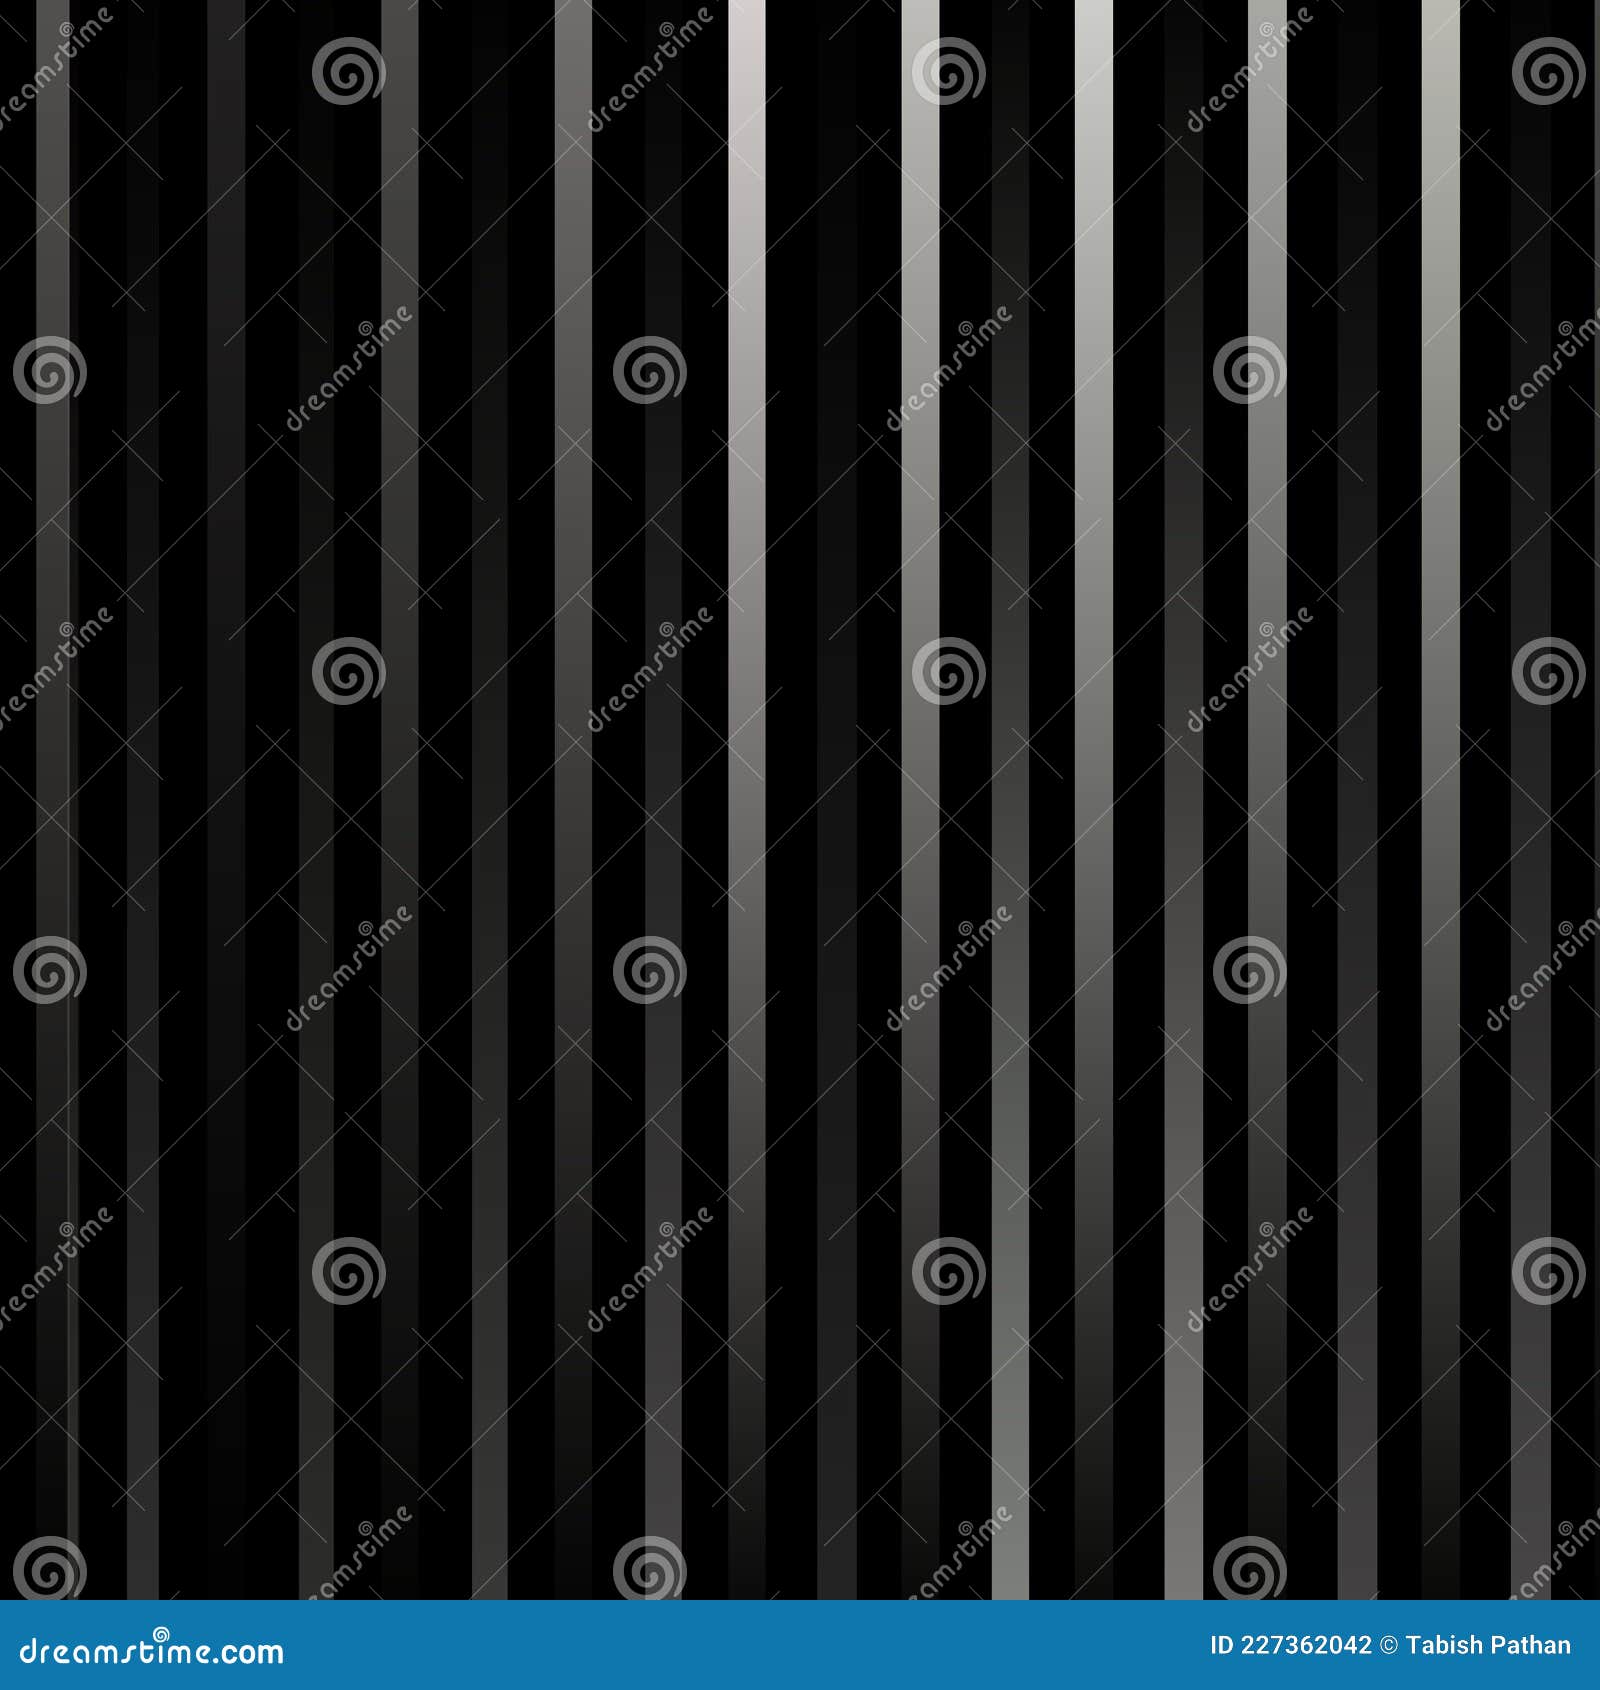 Black-themed Background with White Vertical Lines Stock Illustration ...